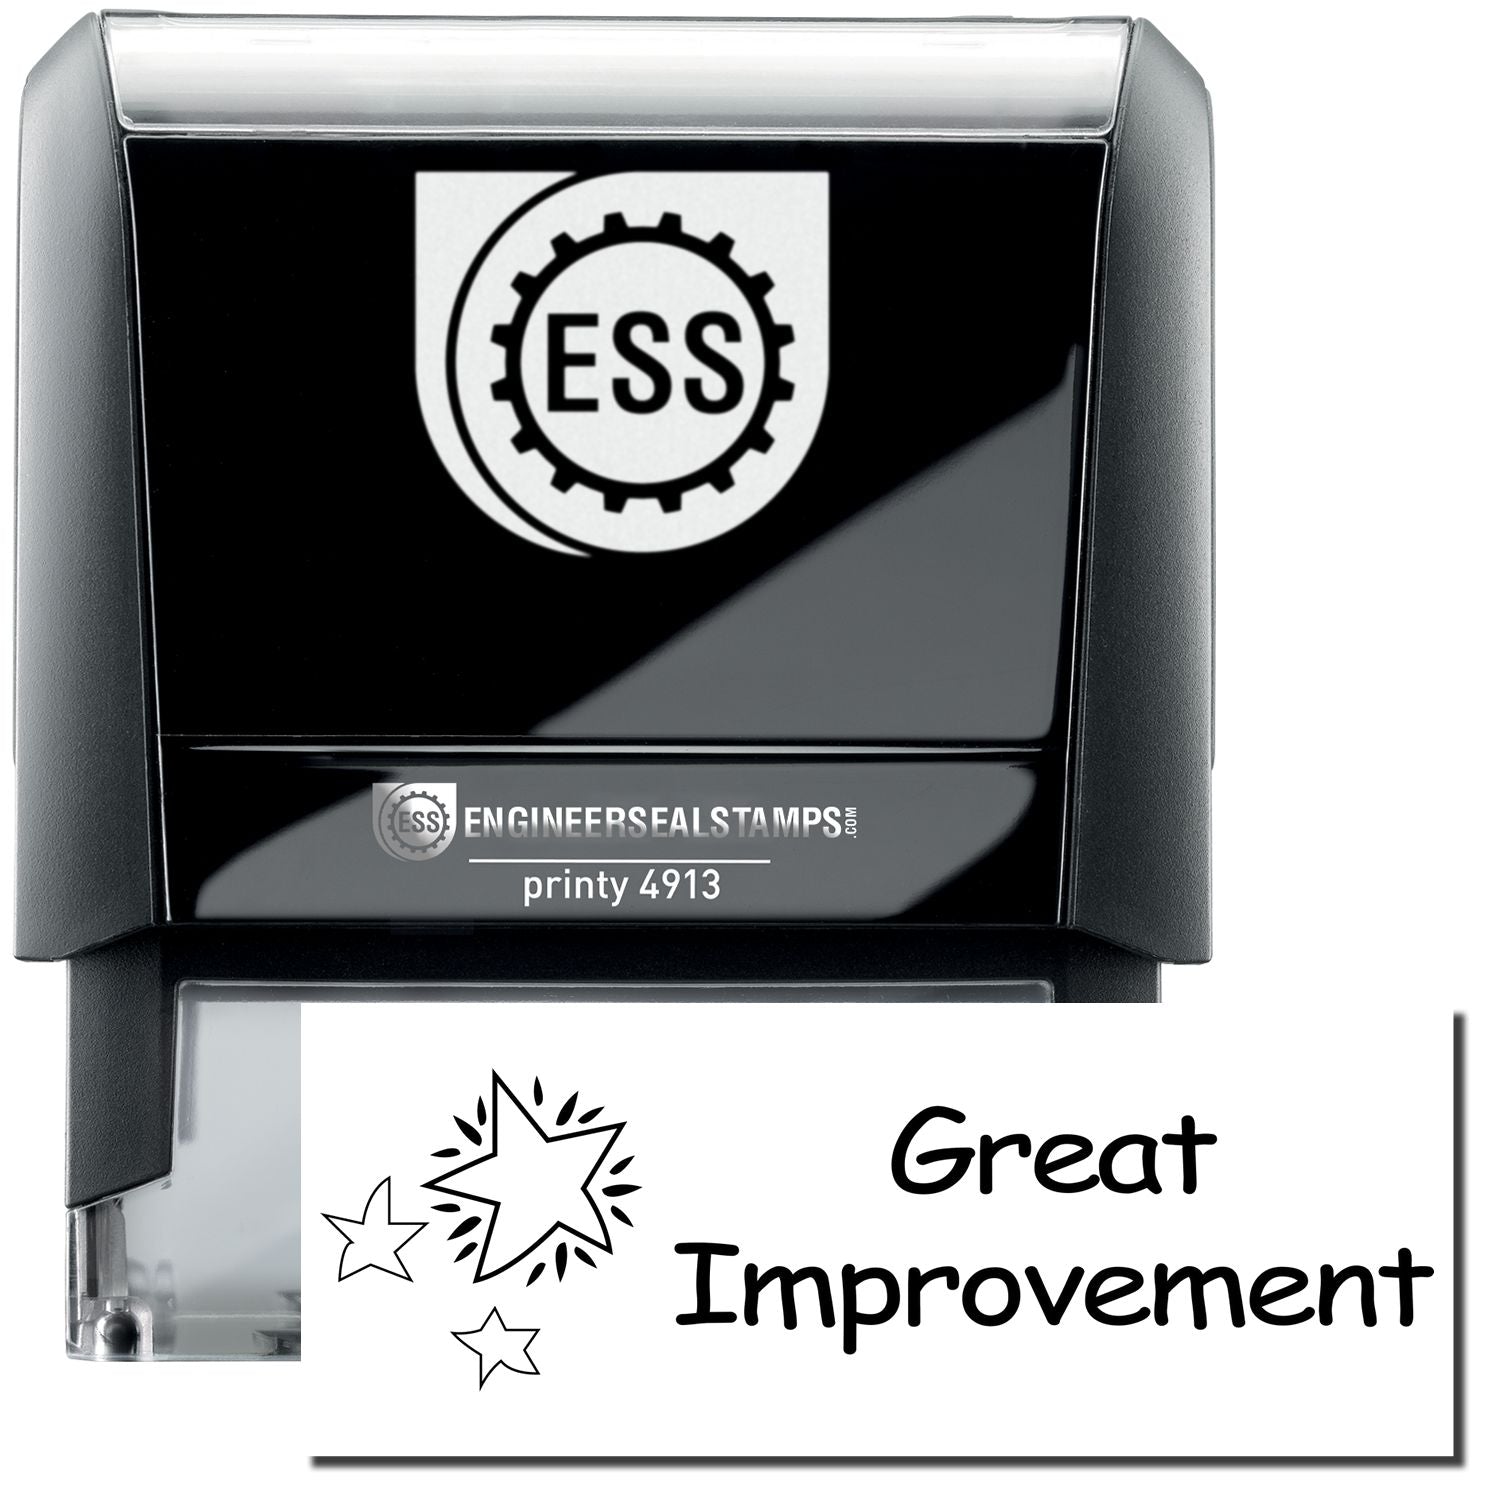 A self-inking stamp with a stamped image showing how the text "Great Improvement" in a large whimsical font with a trio of stars on the left side is displayed by it after stamping.